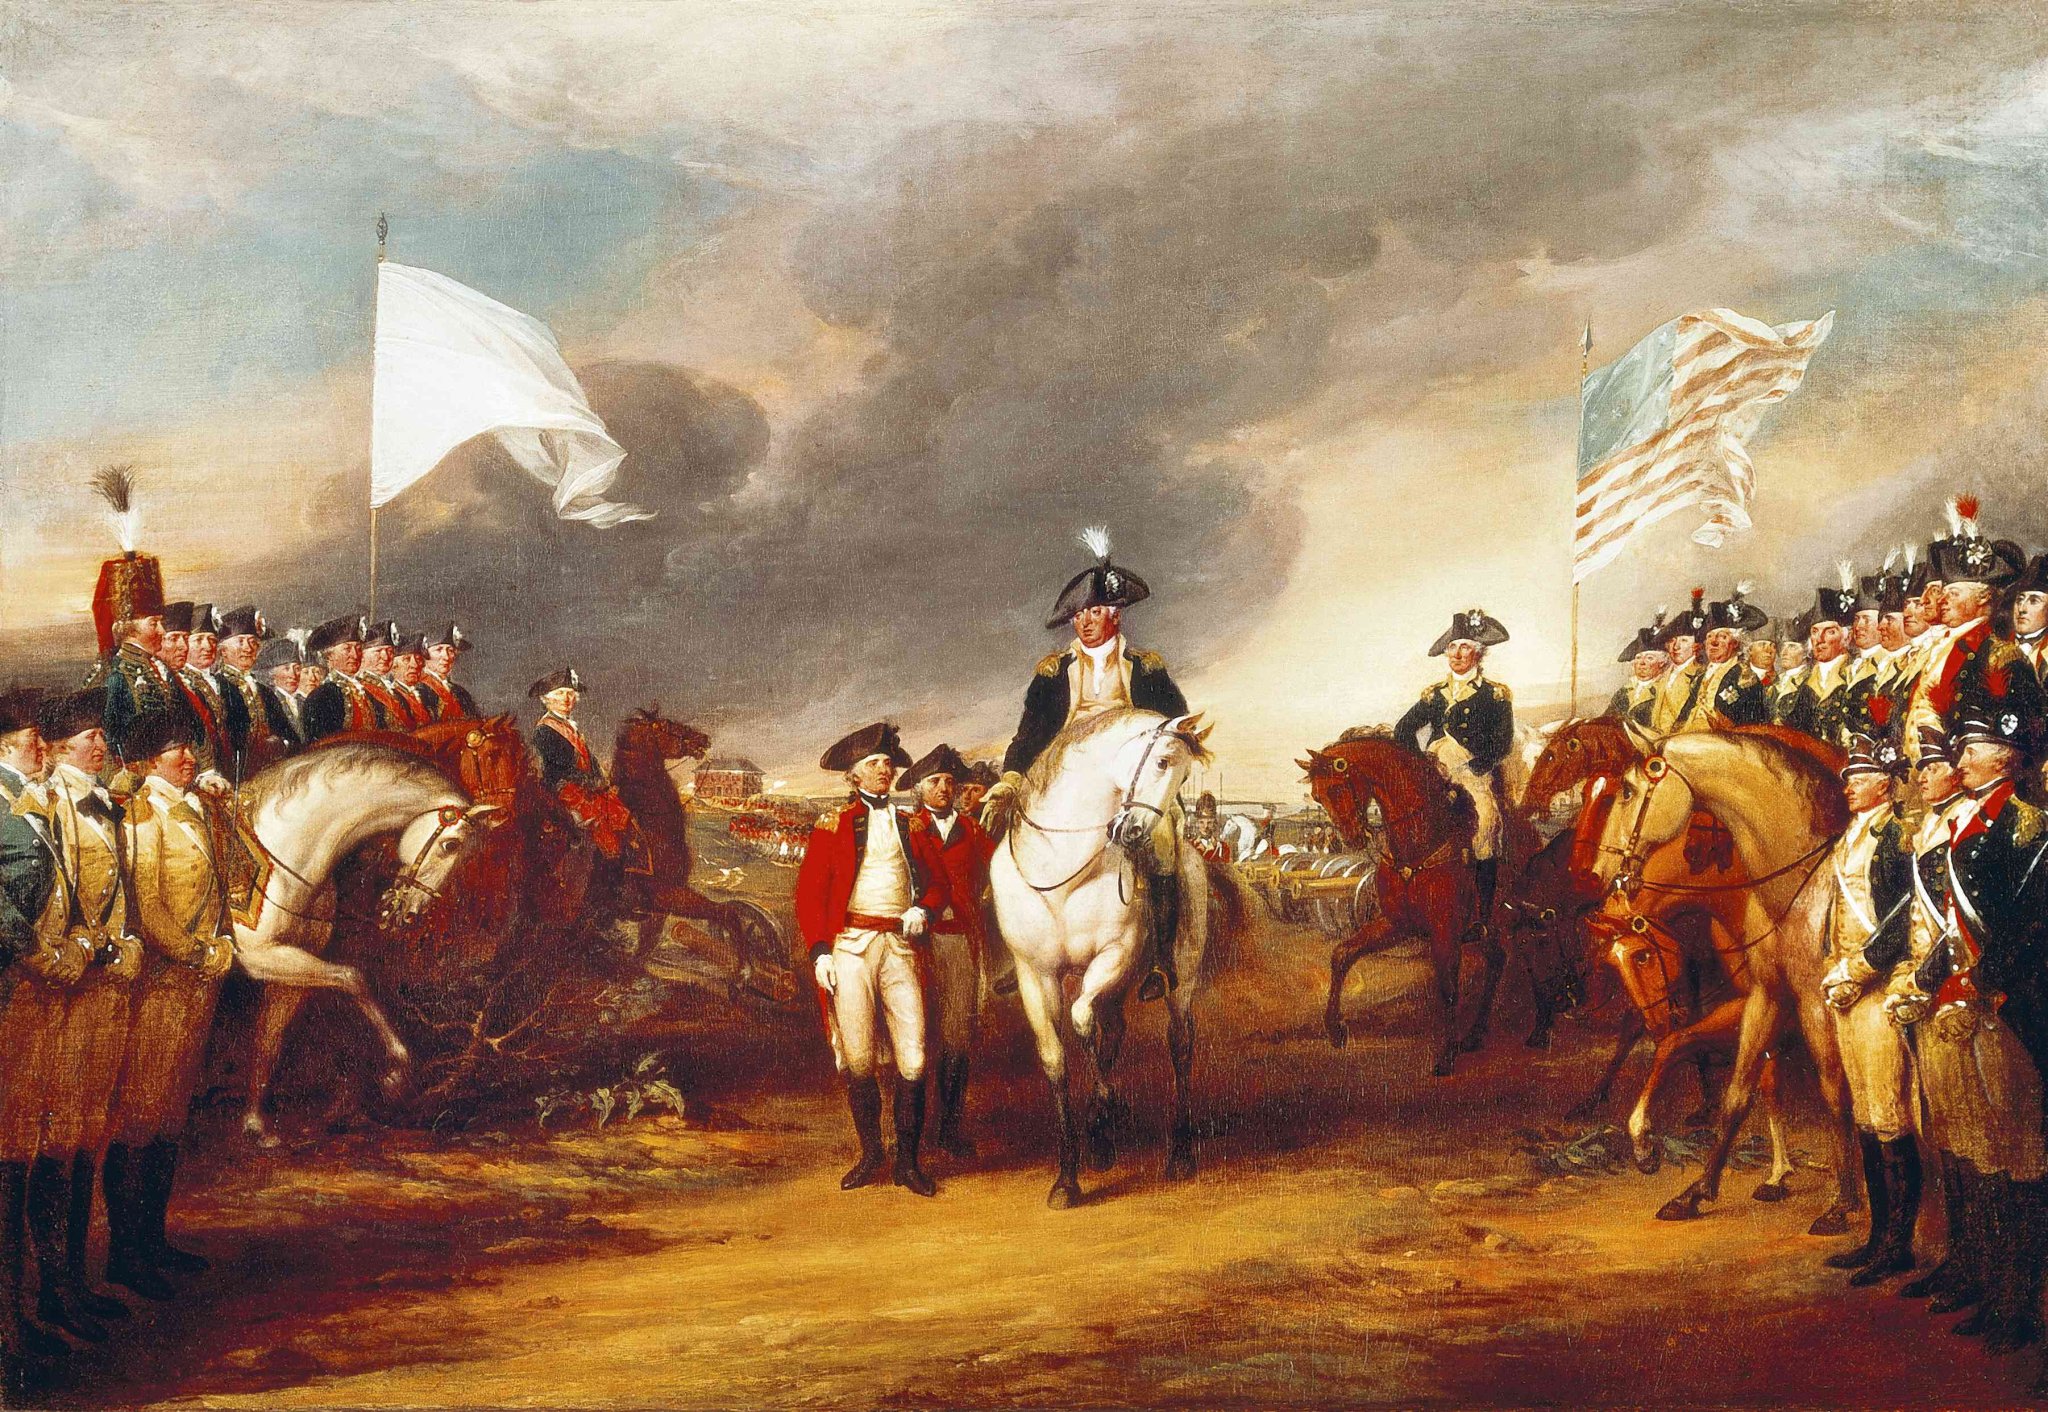 Interesting Facts about the American Revolution You Might Not Know